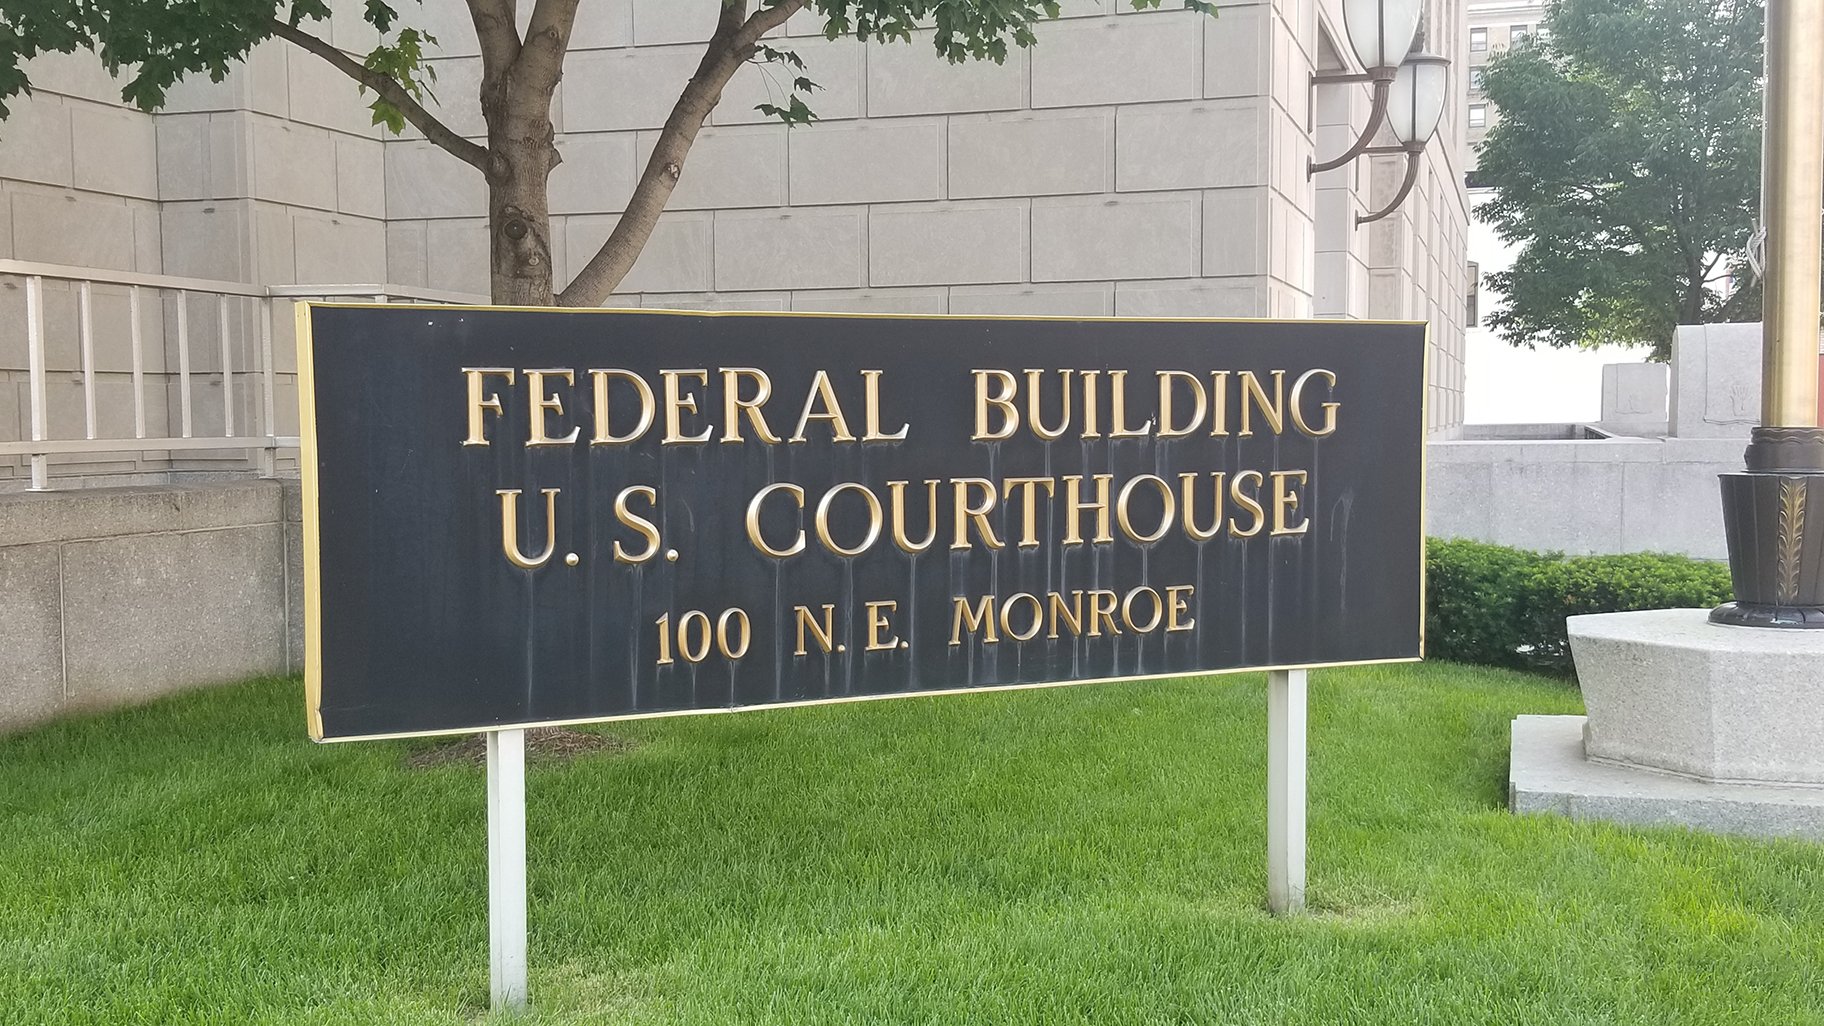 The Federal Building and U.S. Courthouse in Peoria, Illinois where Brendt Christensen is currently on trial. (Matt Masterson / WTTW News)